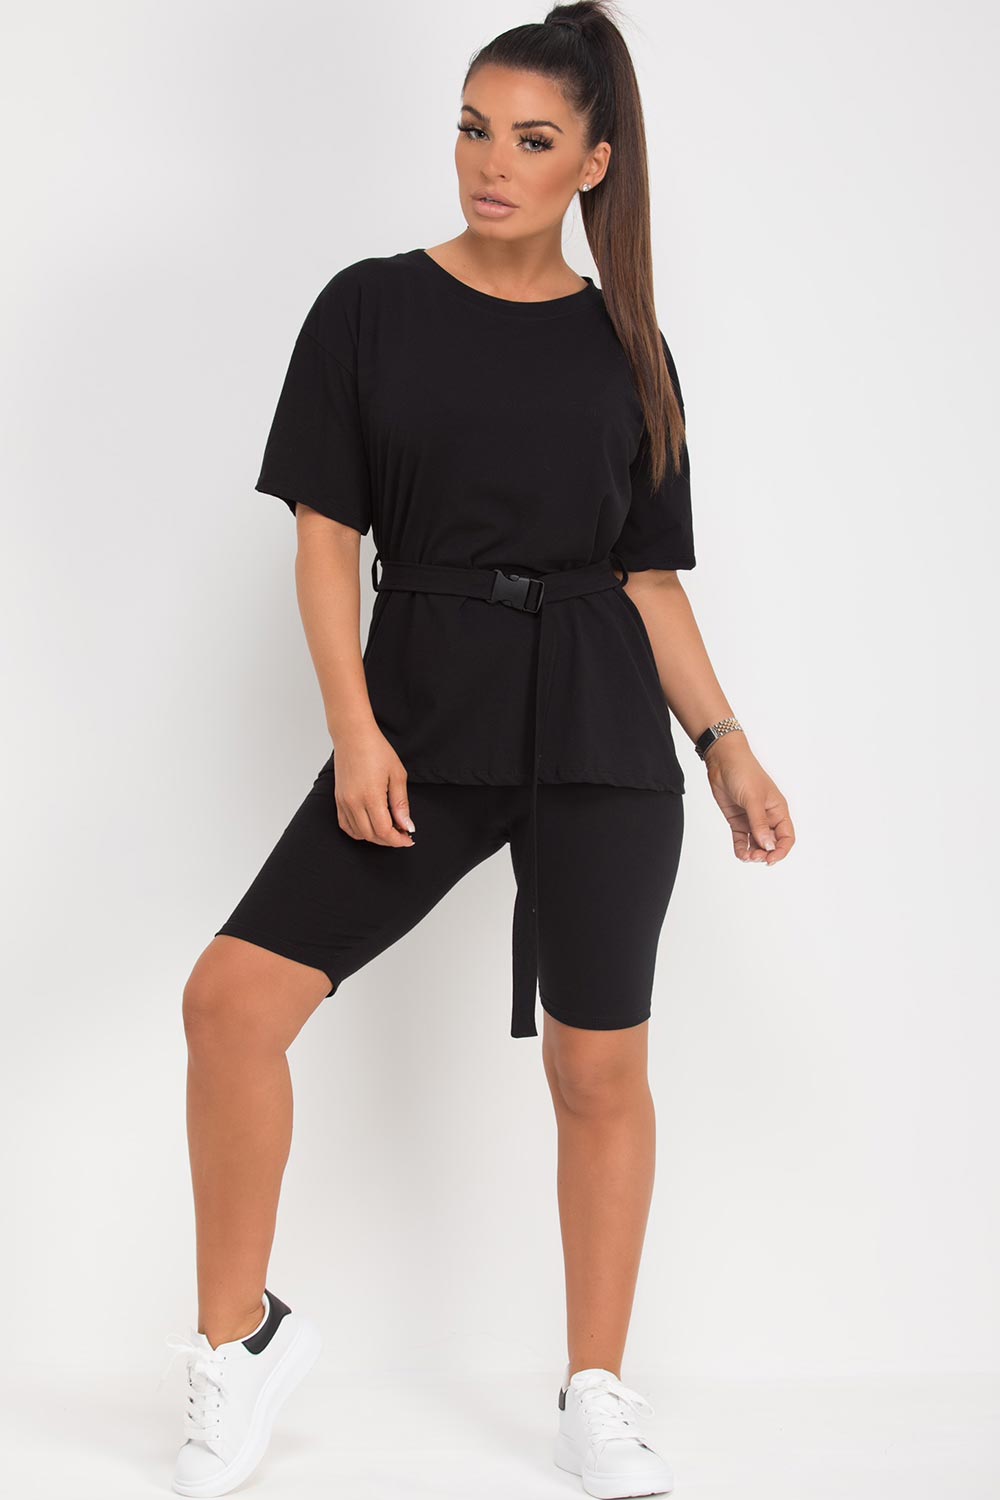 Women's Cycling Shorts & Oversized Top Set With Utility Belt Black Co-Ord –